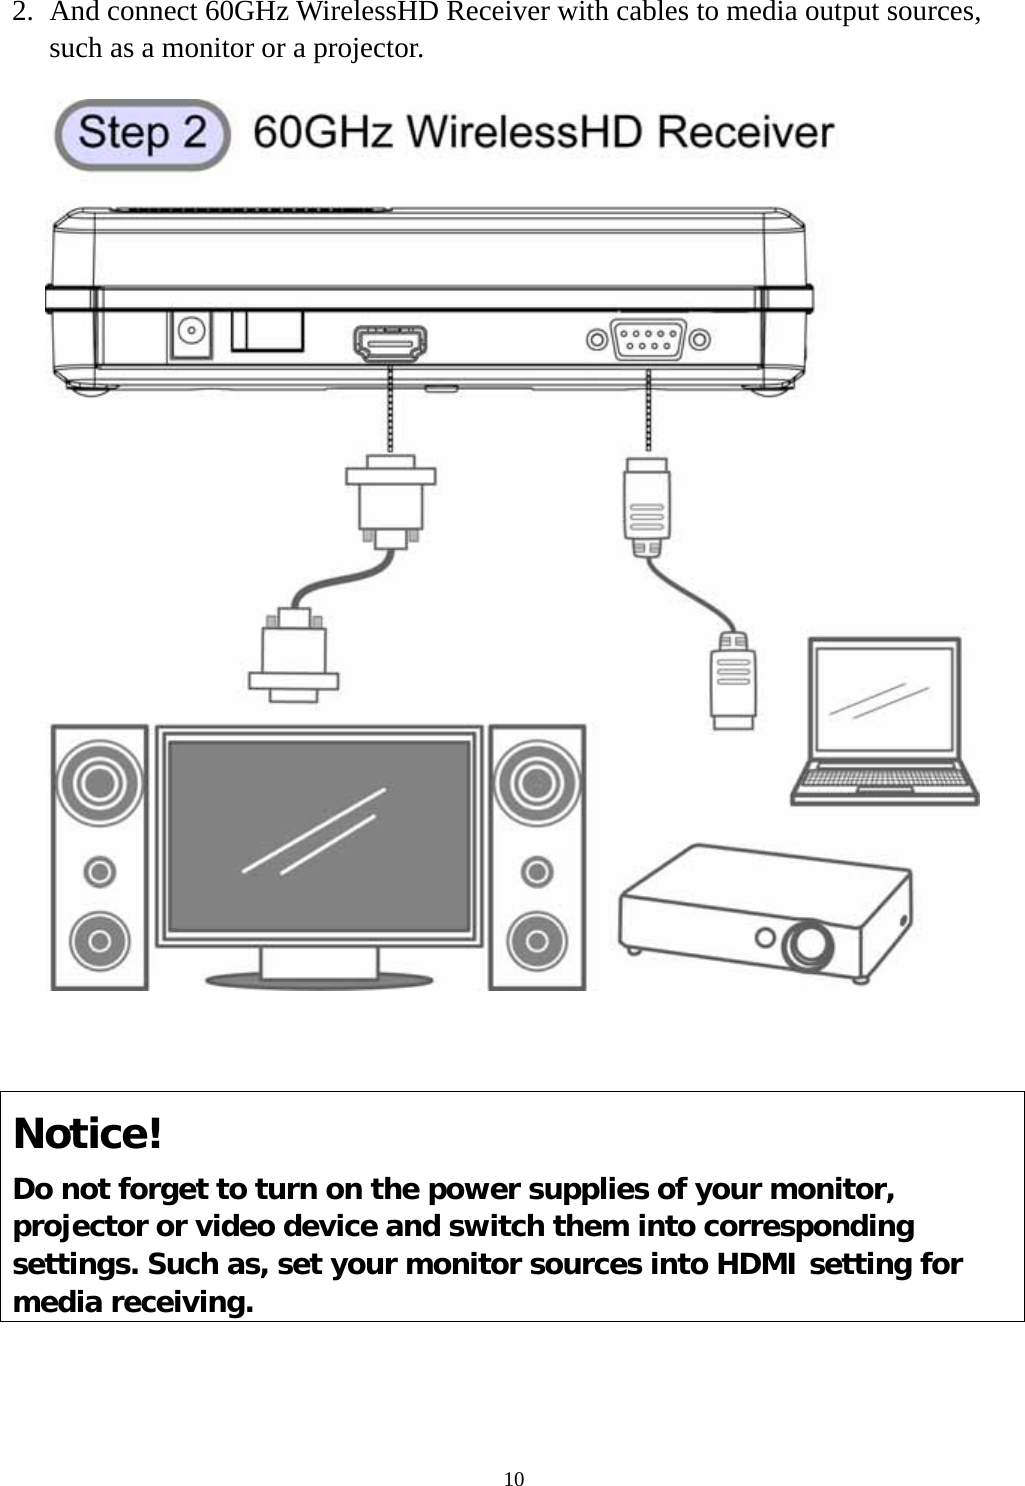  102. And connect 60GHz WirelessHD Receiver with cables to media output sources, such as a monitor or a projector.   Notice! Do not forget to turn on the power supplies of your monitor, projector or video device and switch them into corresponding settings. Such as, set your monitor sources into HDMI setting for media receiving. 